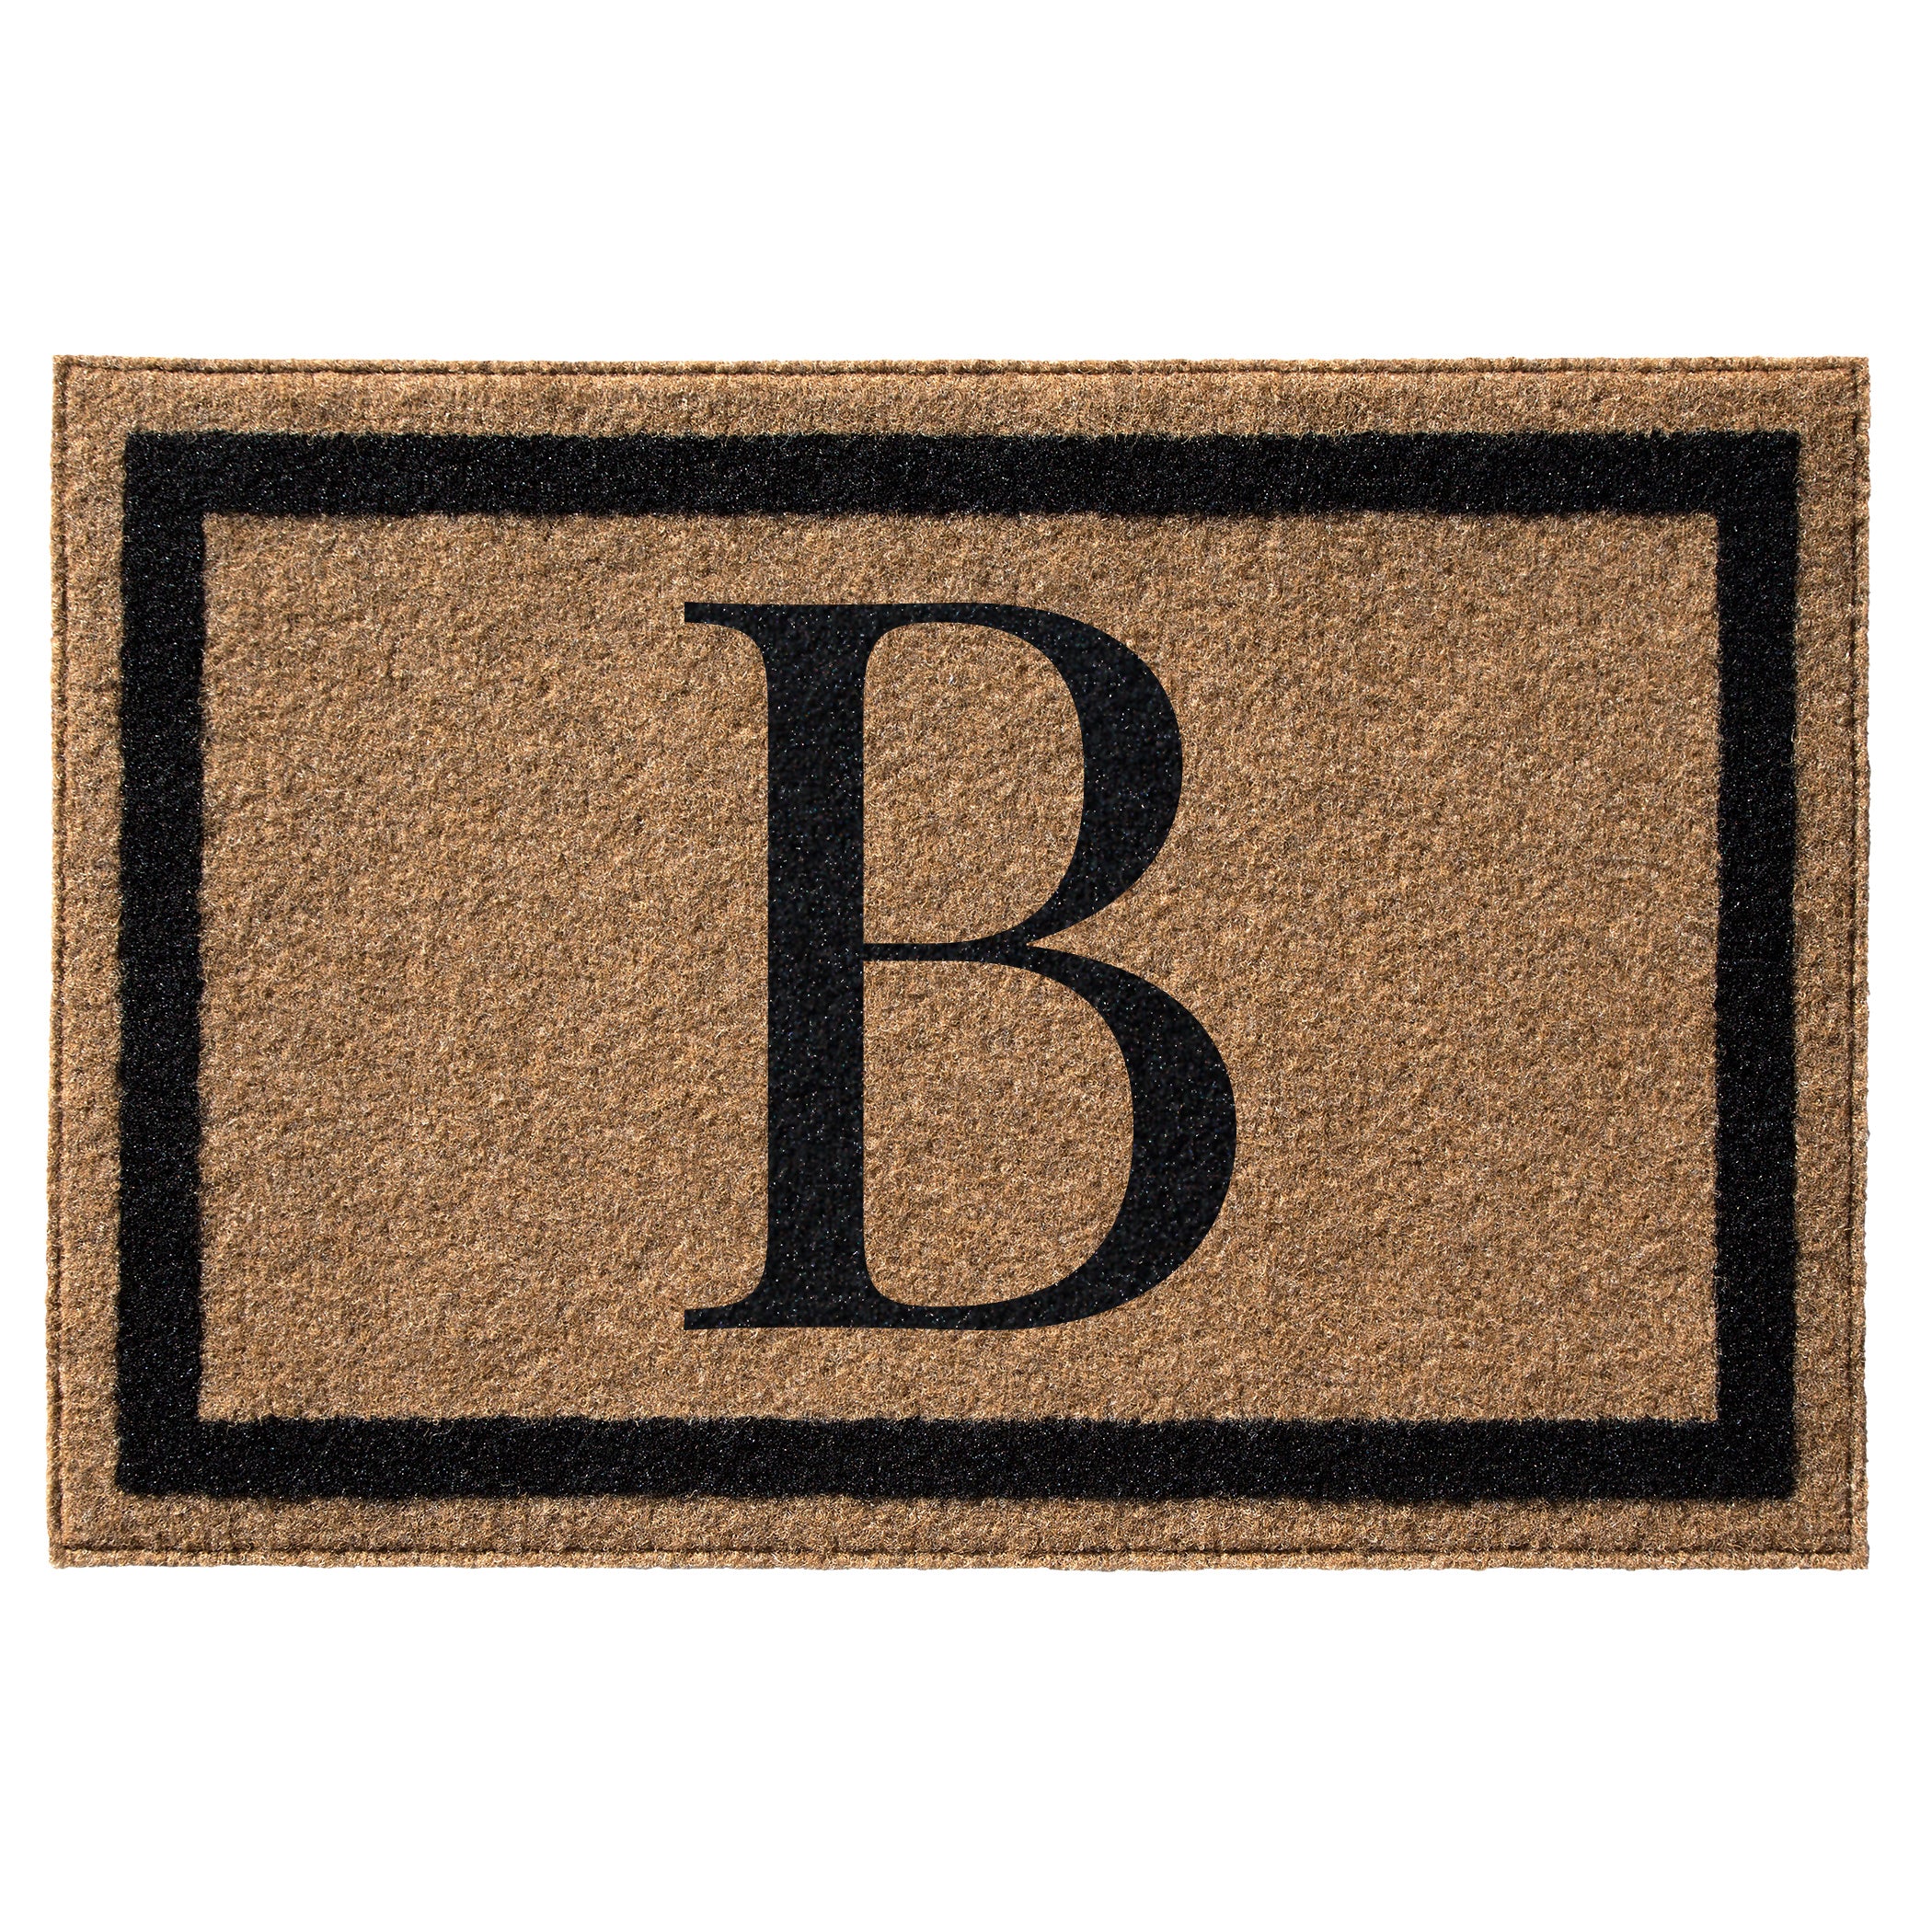 Infinity Custom Mats™ All-Weather Personalized Door Mat - STYLE: WILLI 